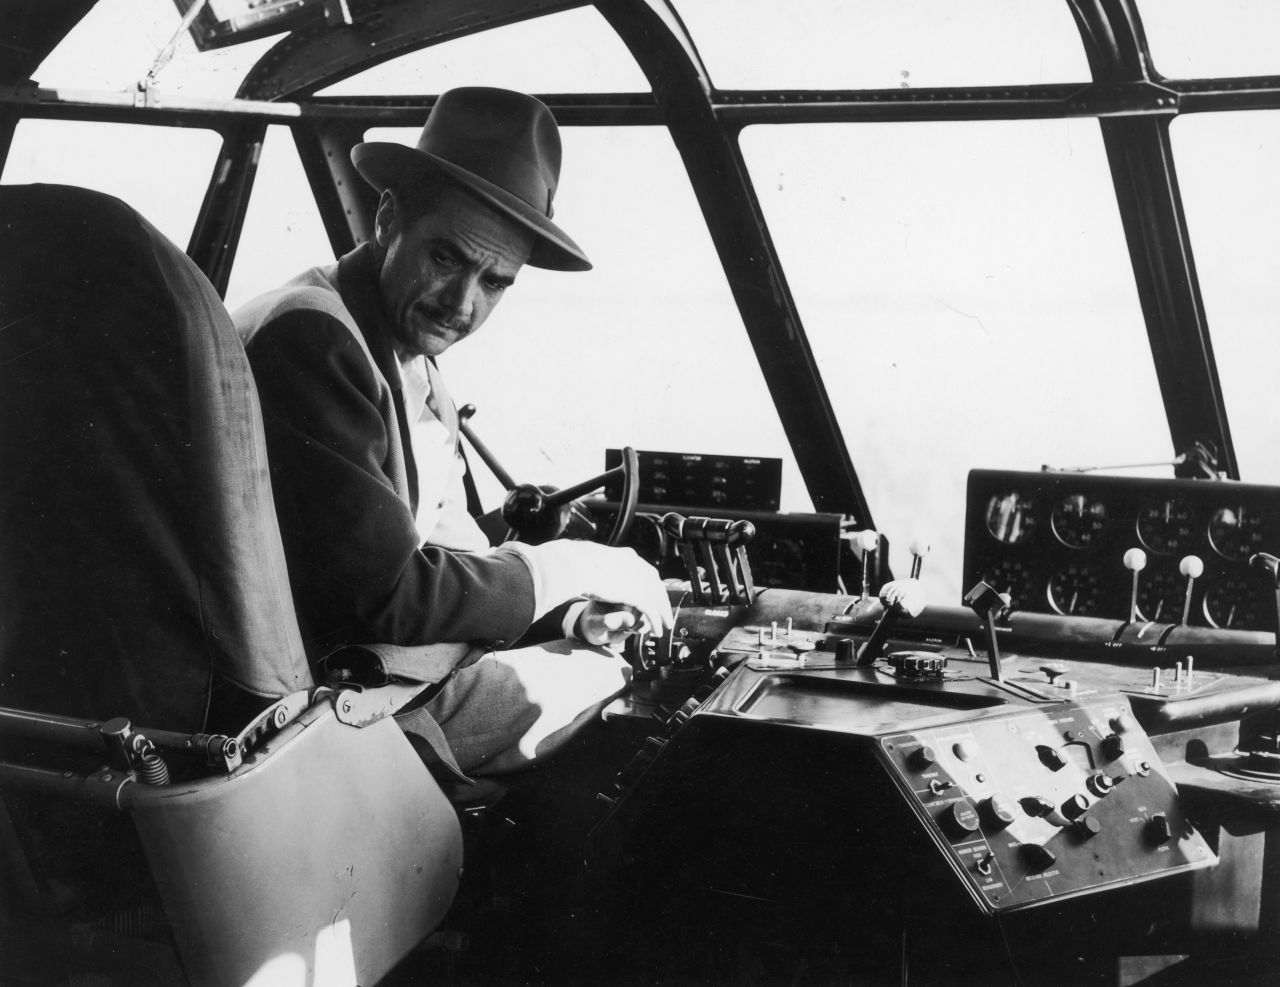 Hughes, pictured here in the plane's pilot seat, flew the H-4 during its only flight. On November 2, 1947, off California's Long Beach harbor, the seaplane became airborne for about a mile and reached an altitude of about 70 feet. Saying it needed more development, Hughes stored it in a hangar and never let it fly again. 